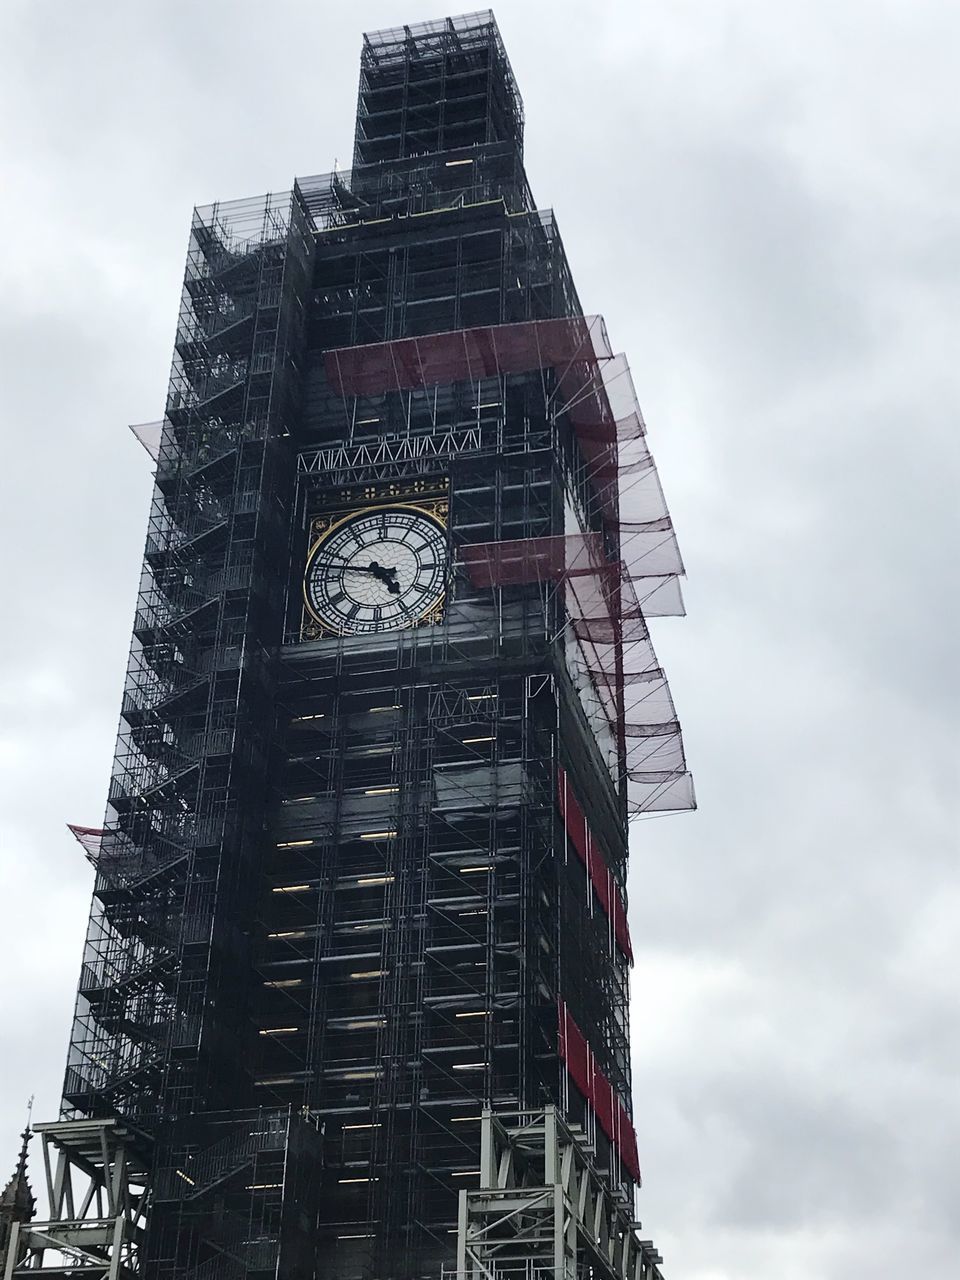 LOW ANGLE VIEW OF CLOCK TOWER AGAINST CLOUDY SKY